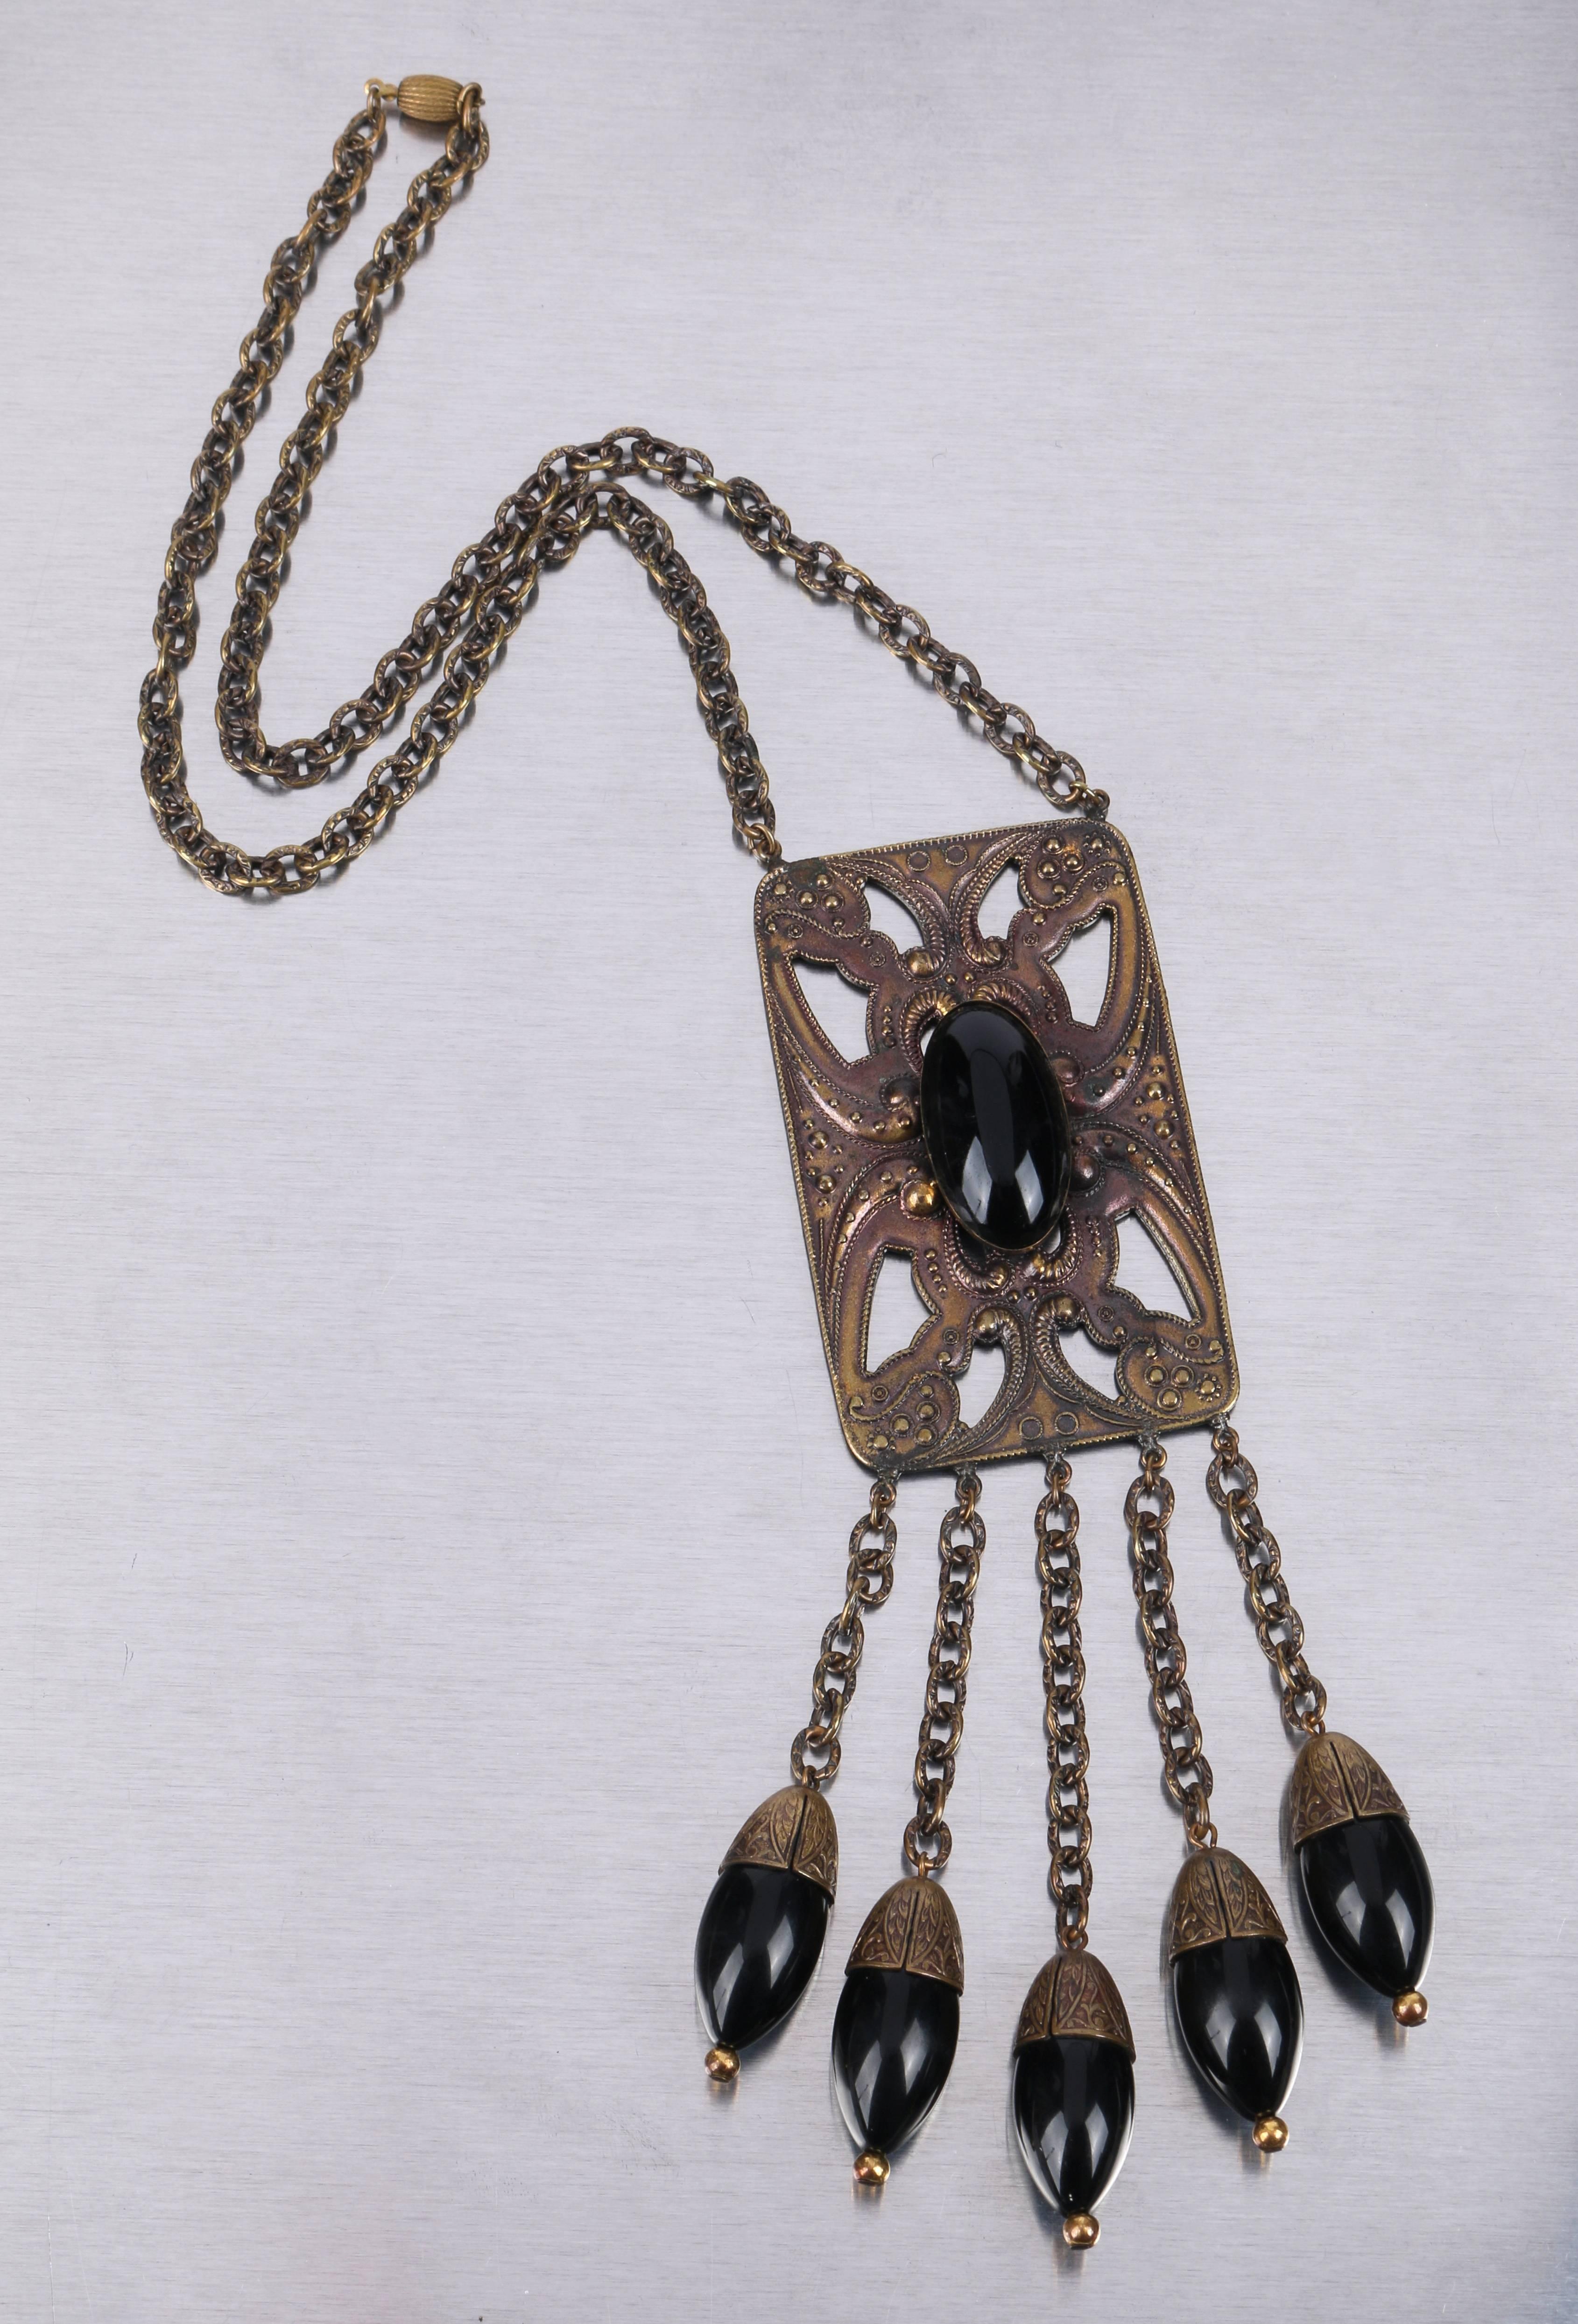 Vintage c.1920's Art Deco bronze tone large open cut pendant with black onyx glass cabochon bead dangles on open link chain necklace. Large rectangular open cut carved scroll design bronze tone pendant measures approximately 3